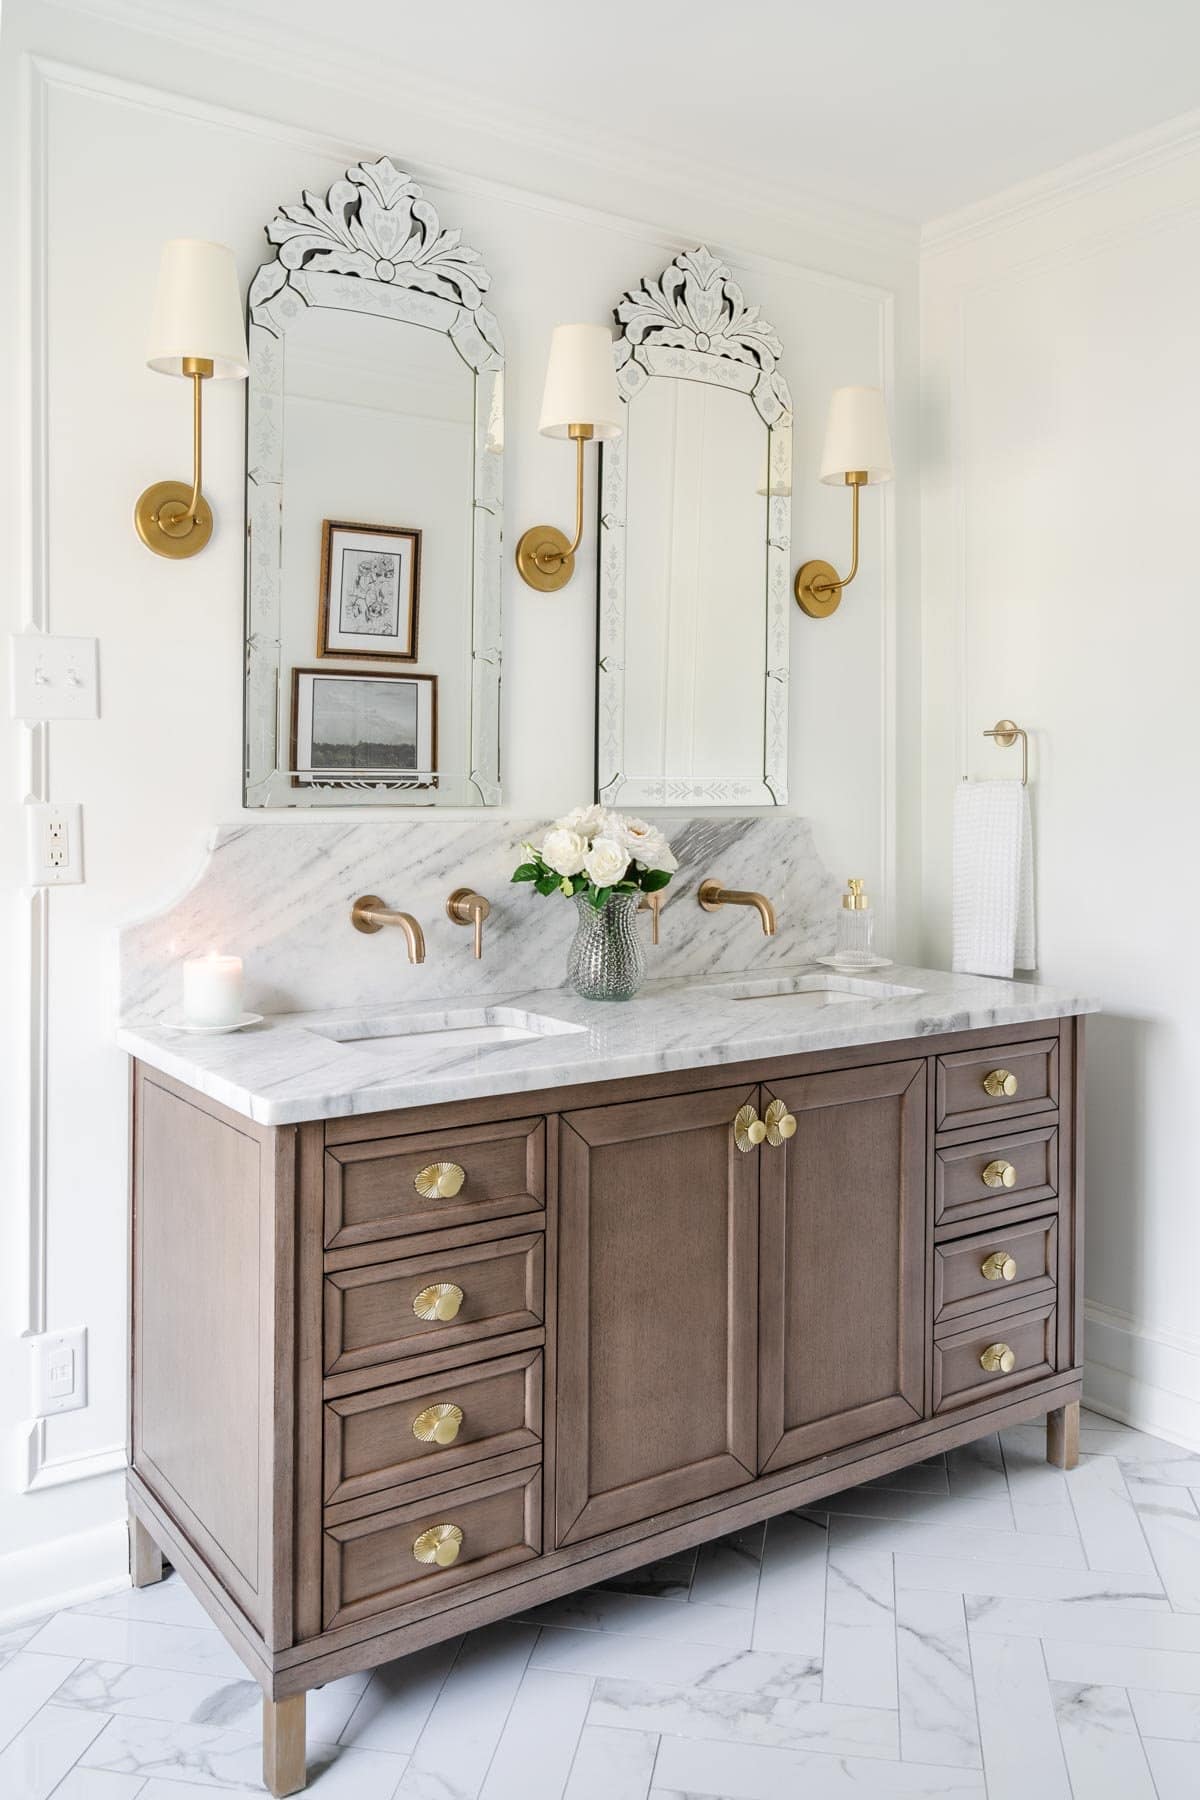 French inspired master bathroom remodel with marble countertop and herringbone tile